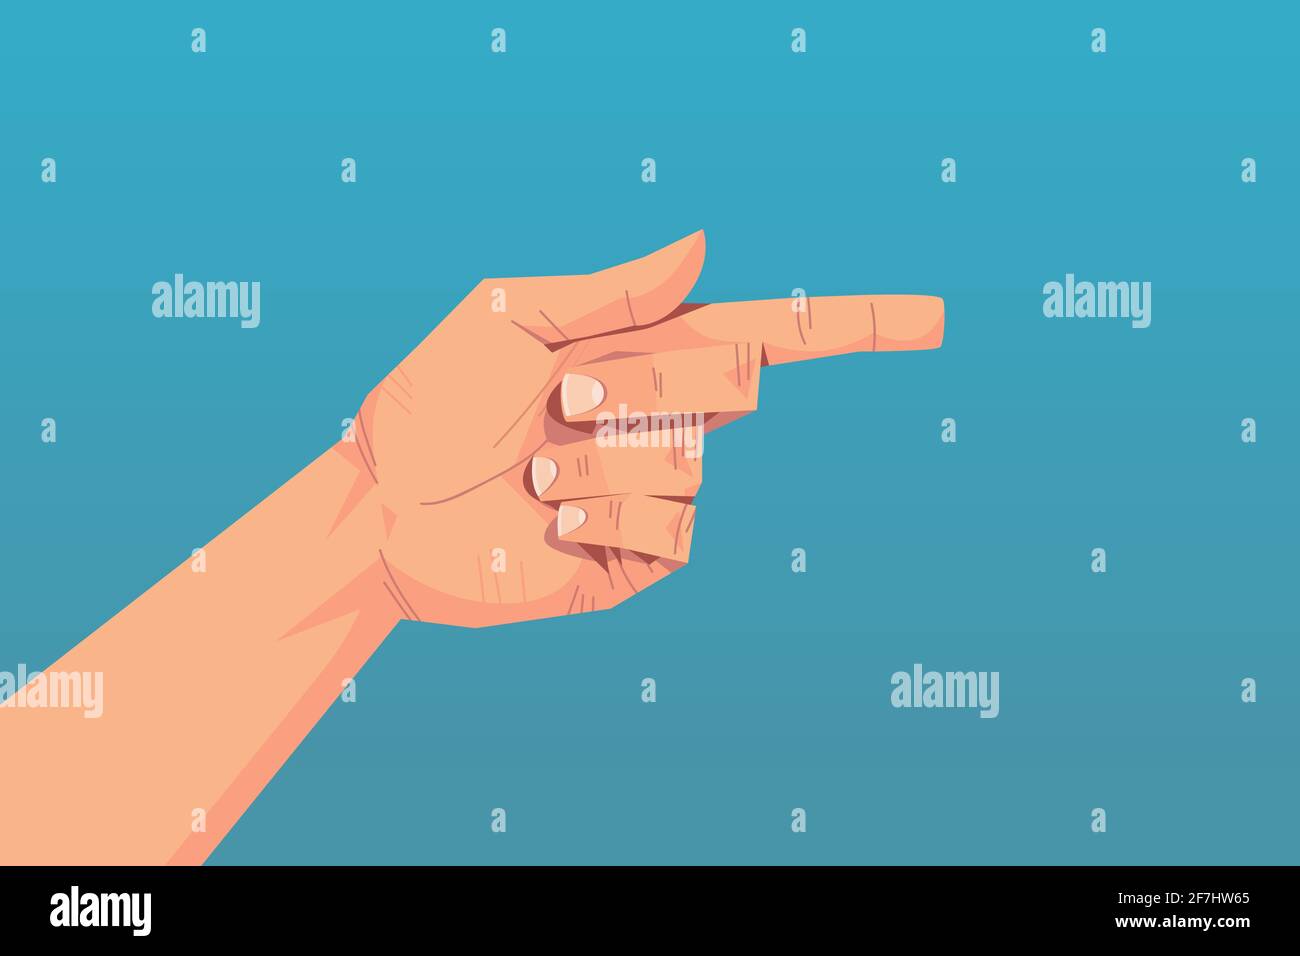 human hand pointing finger on something communication language gesturing concept horizontal Stock Vector